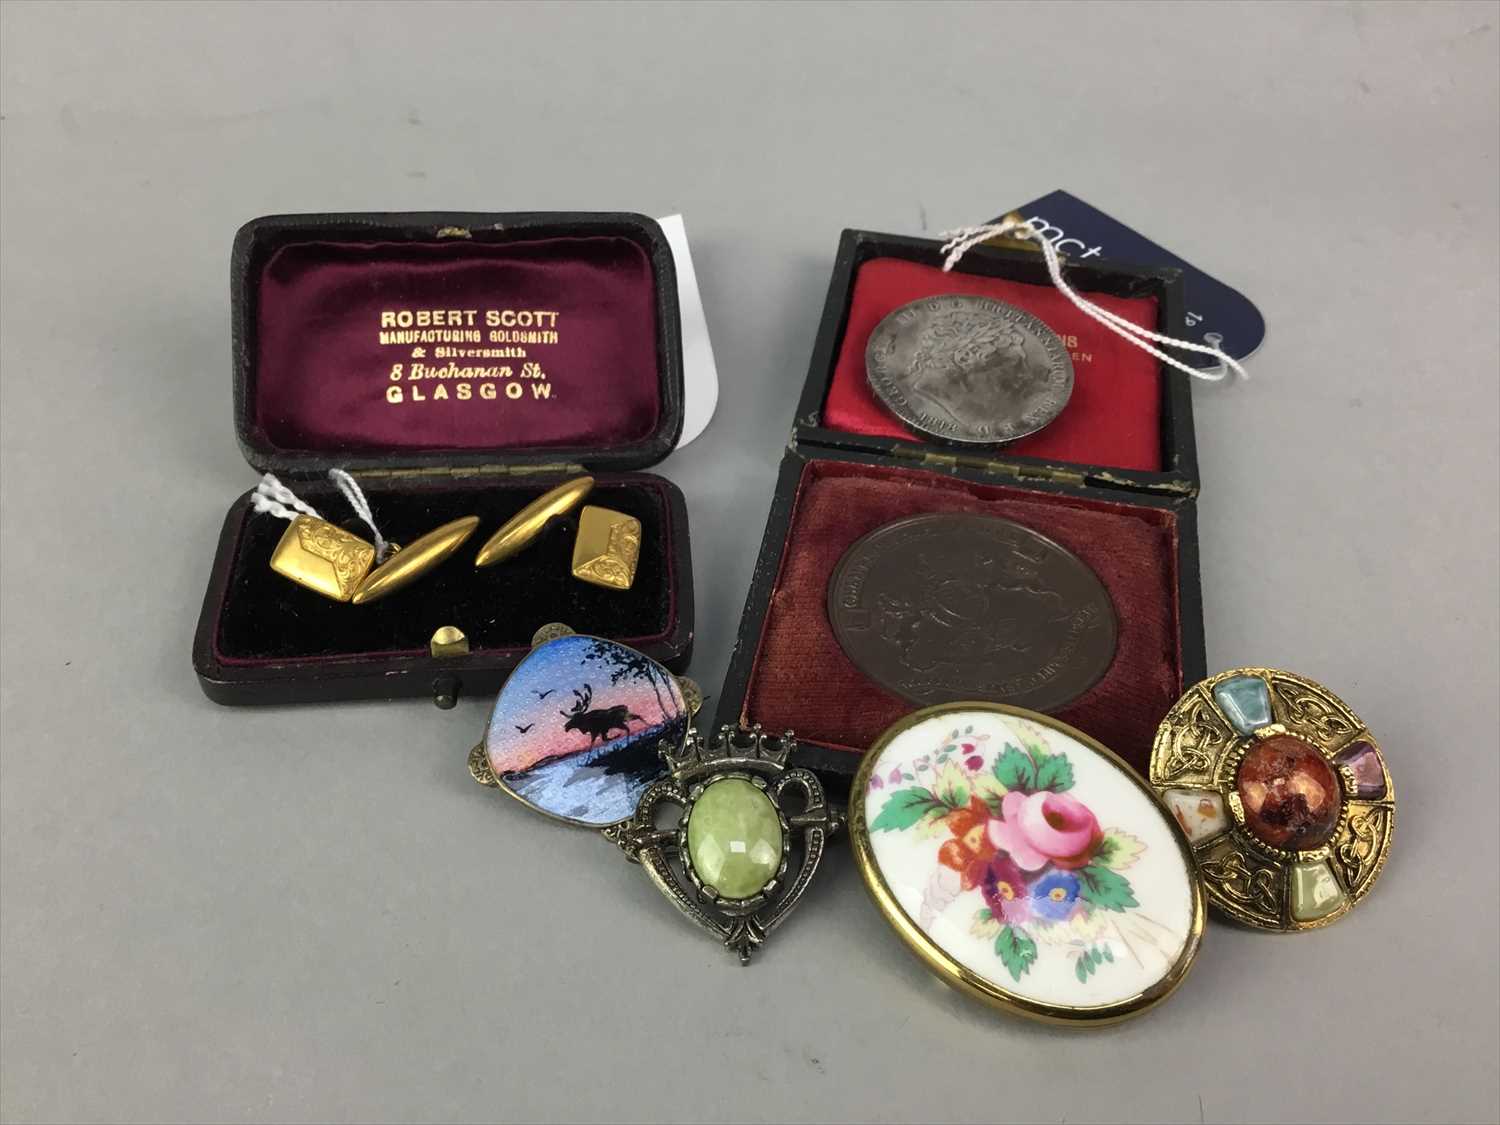 Lot 12 - A PAIR OF 15 CARAT GOLD CUFFLINKS ALONG WITH A SILVER CROWN, AGRICULTURAL MEDAL AND BROOCHES